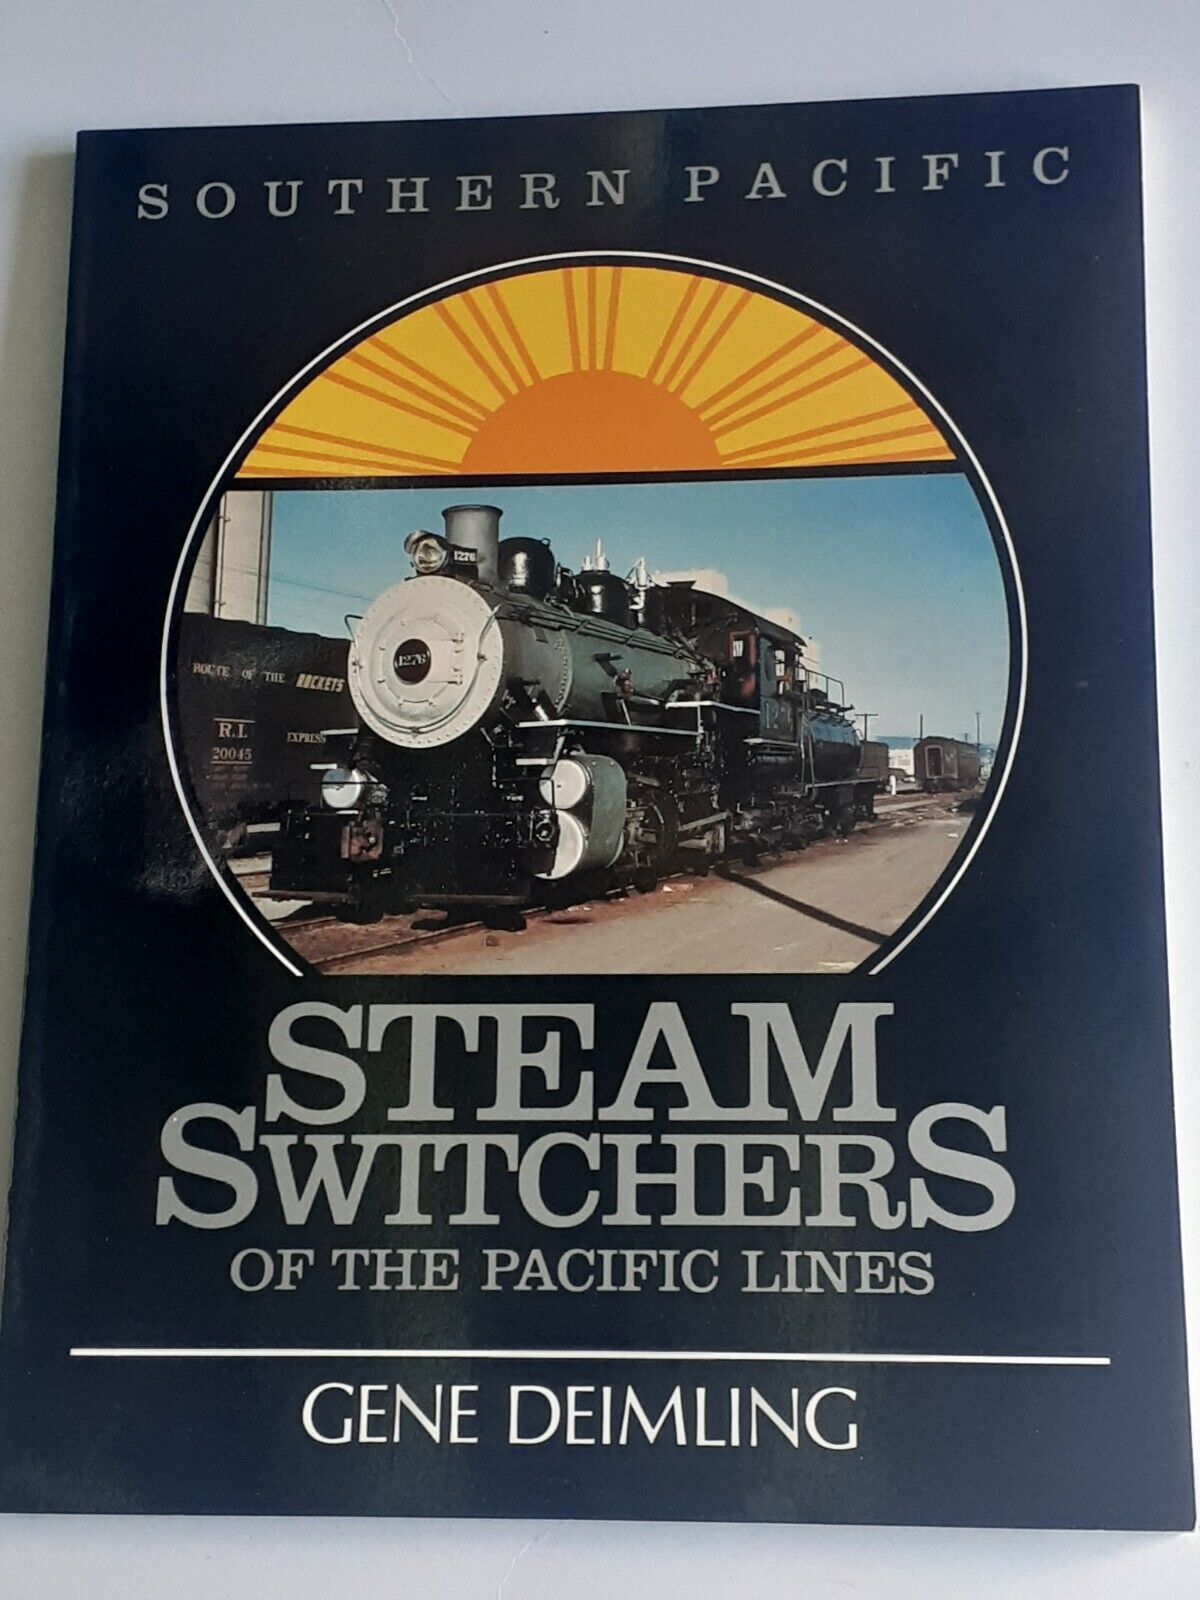 SOUTHERN PACIFIC  STEAM SWITCHERS OF THE PACIFIC LINES BY GENE DEIMLING